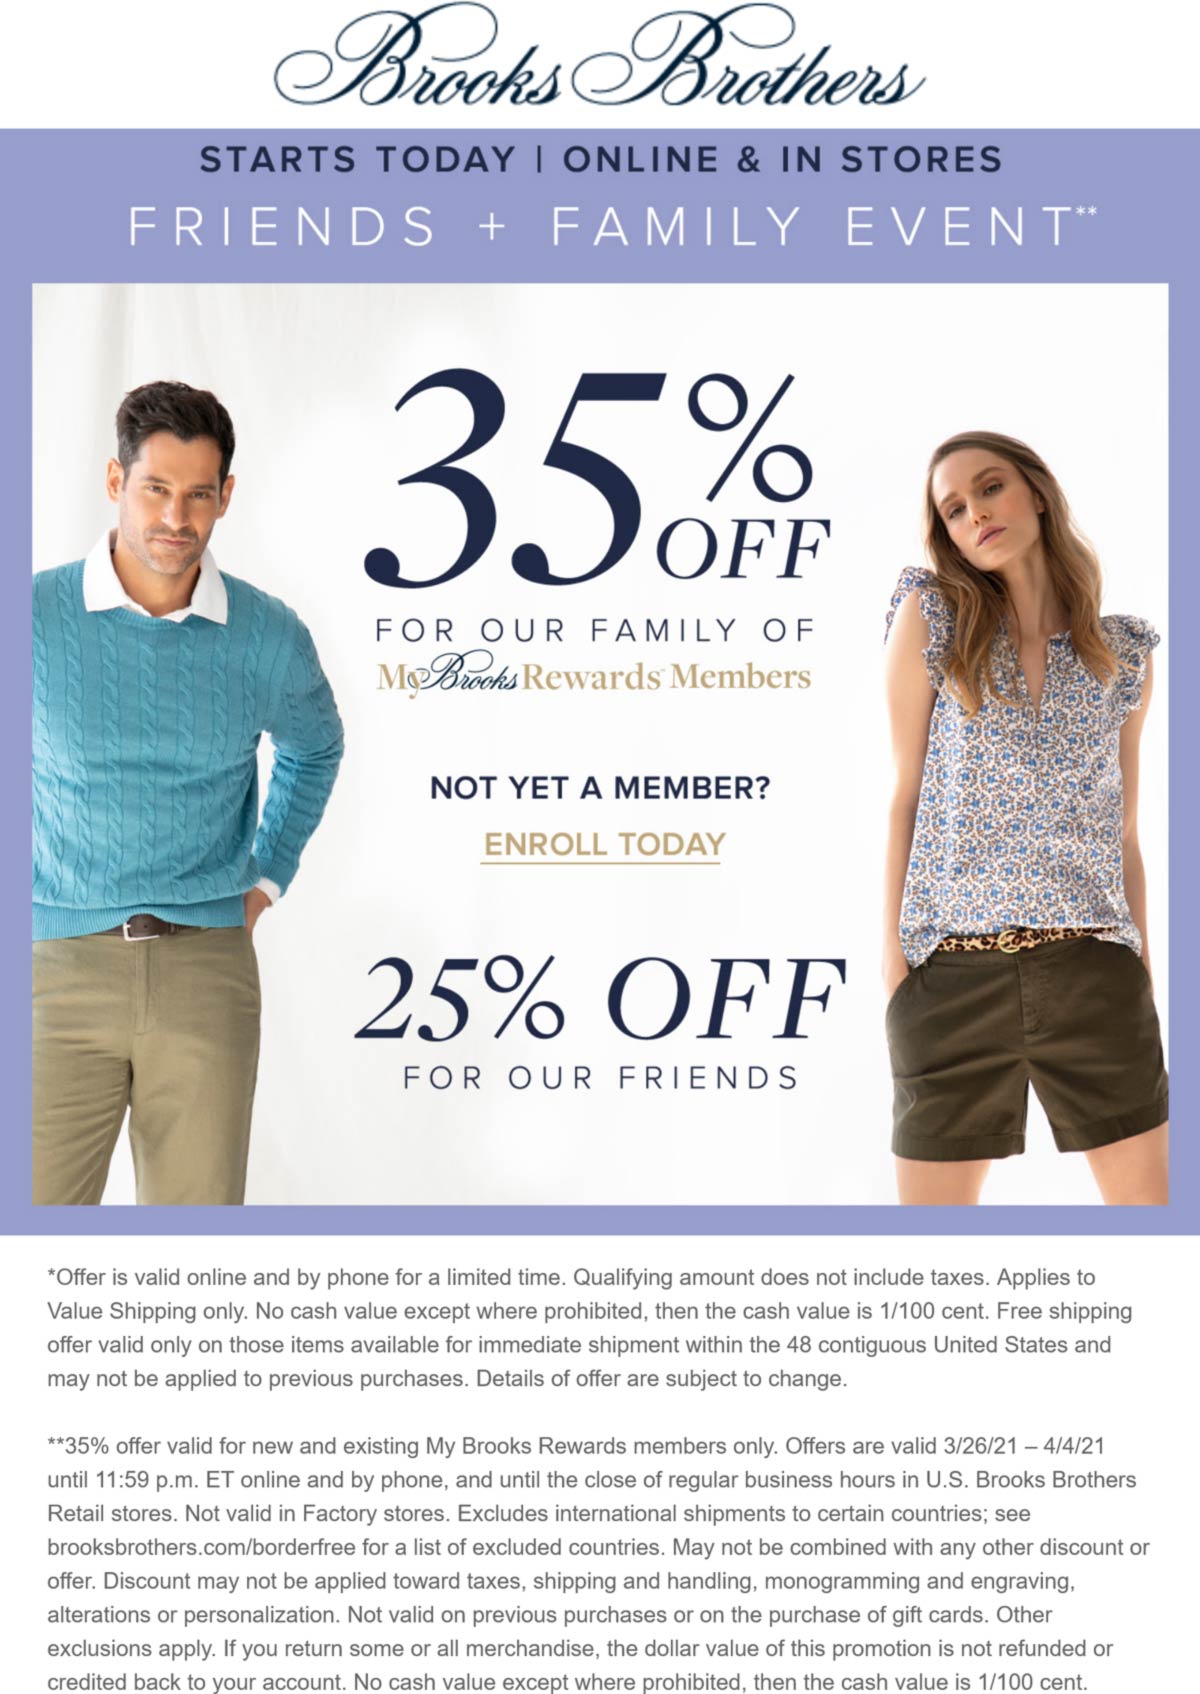 Brooks Brothers stores Coupon  25-35% off at Brooks Brothers, ditto online #brooksbrothers 